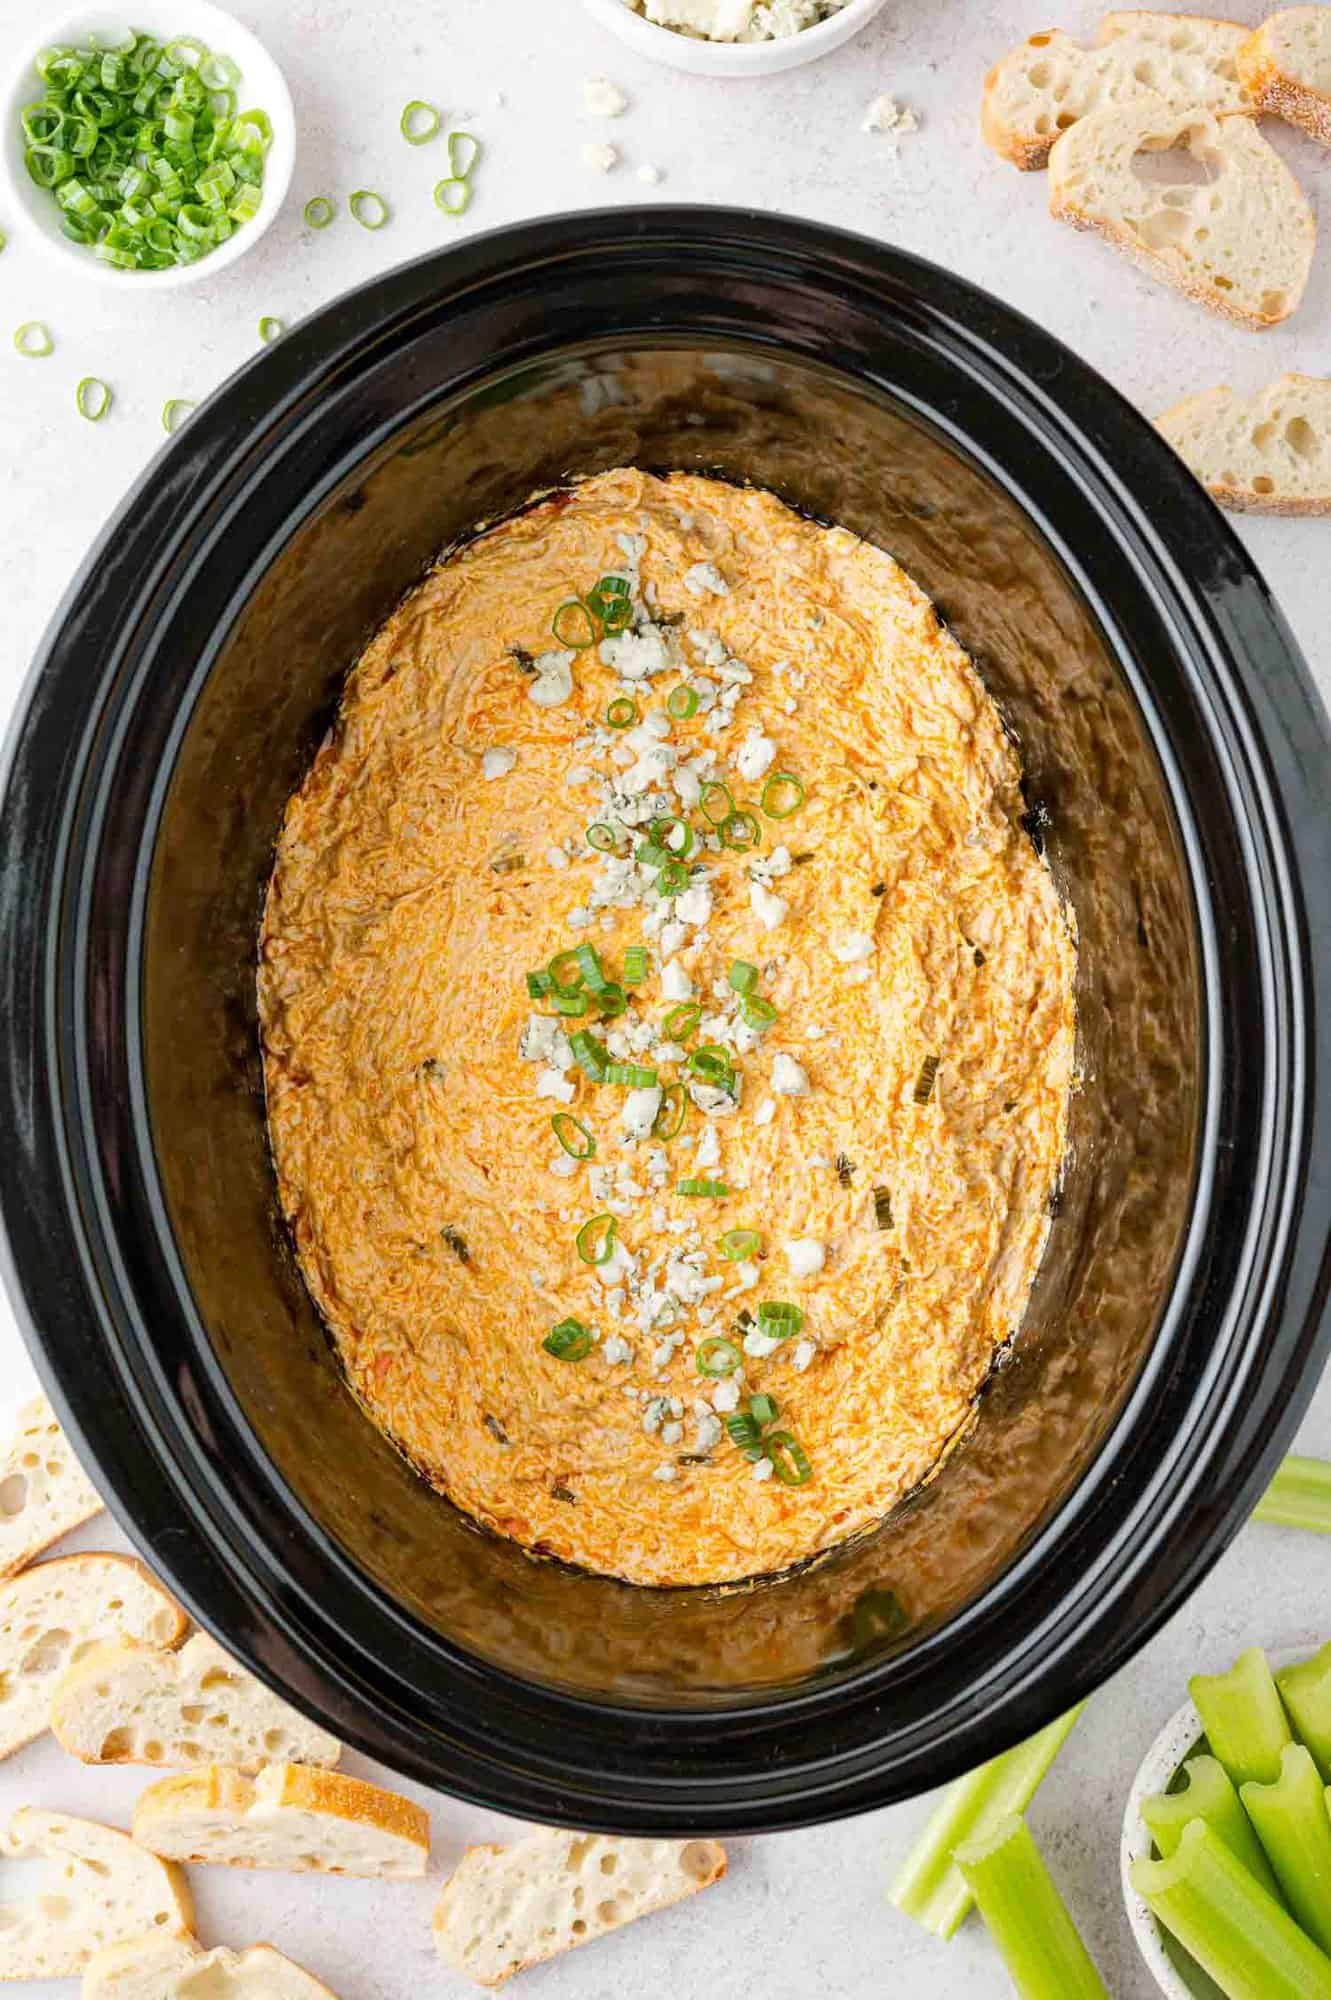 Crockpot buffalo chicken dip garnished with green onions and blue cheese.